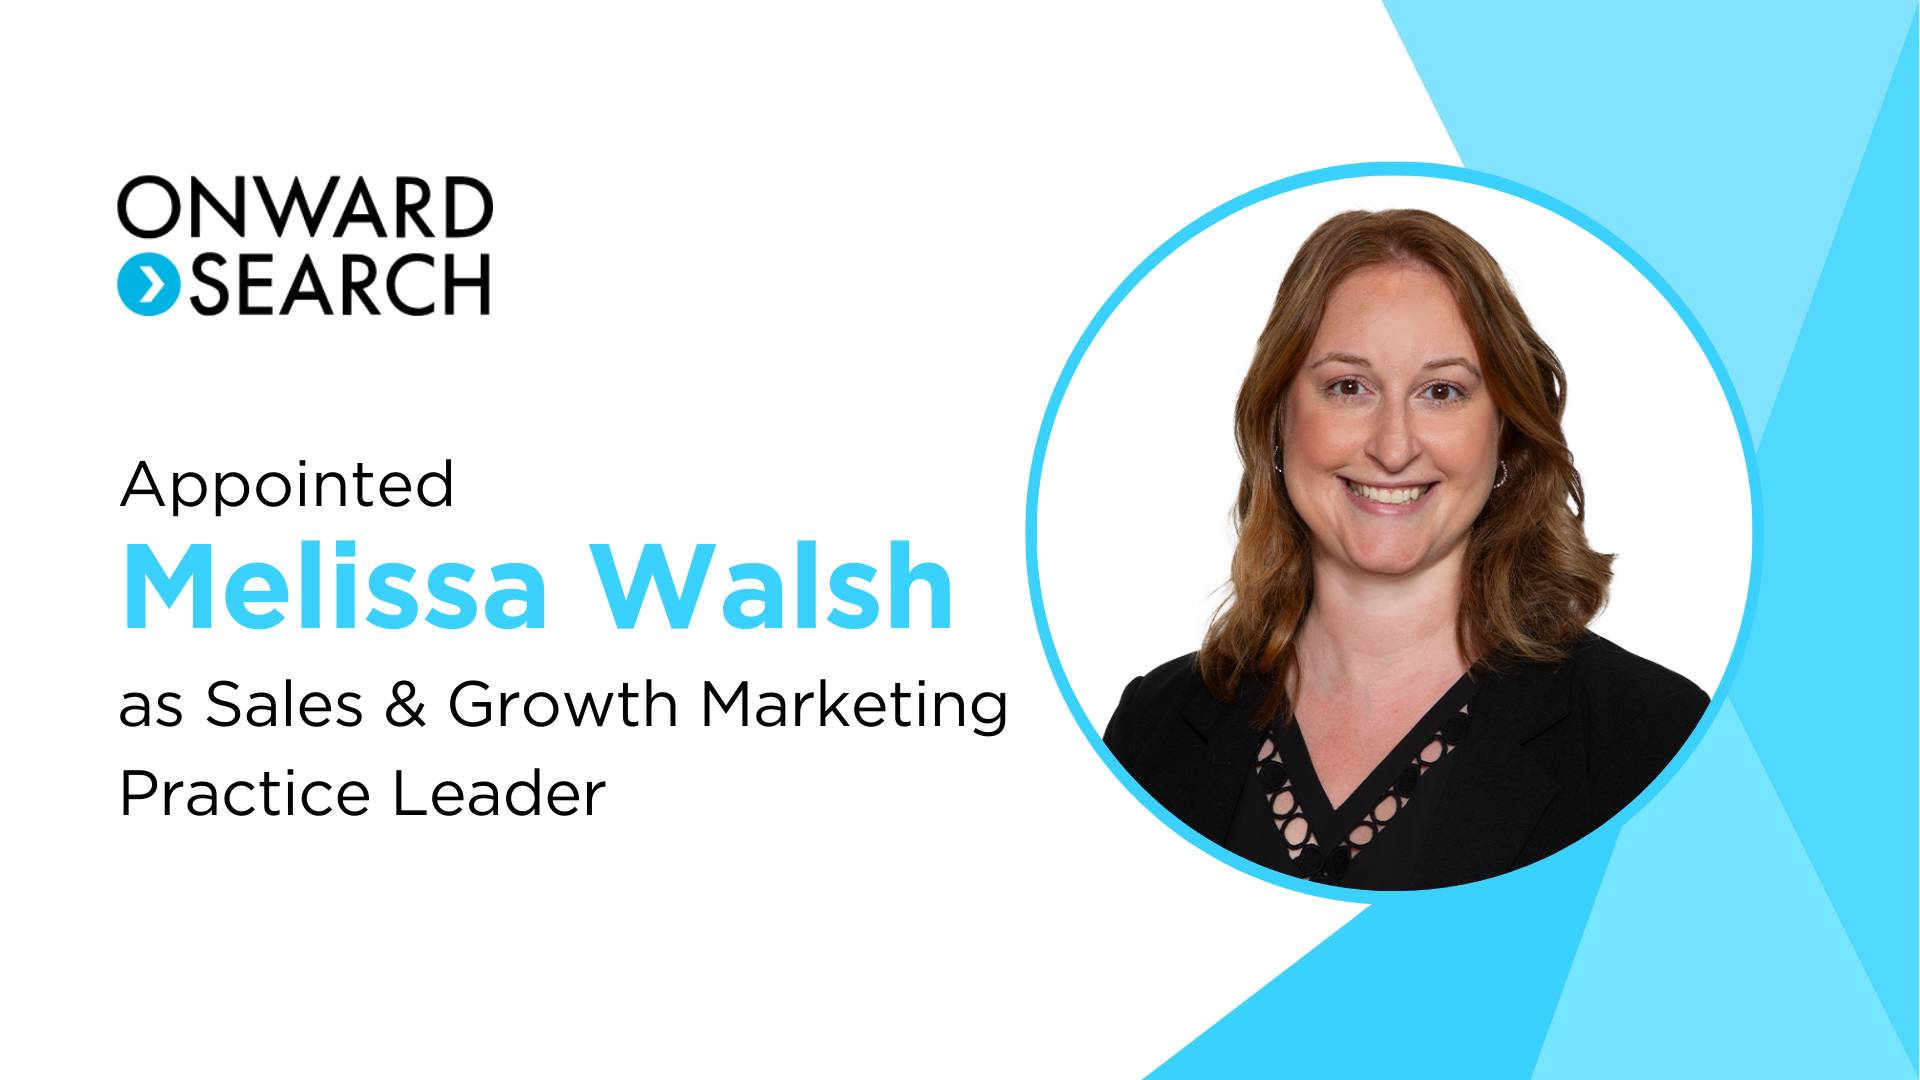 Empowering Revenue Growth: Melissa Walsh Promoted to VP & Practice Leader at Onward Search